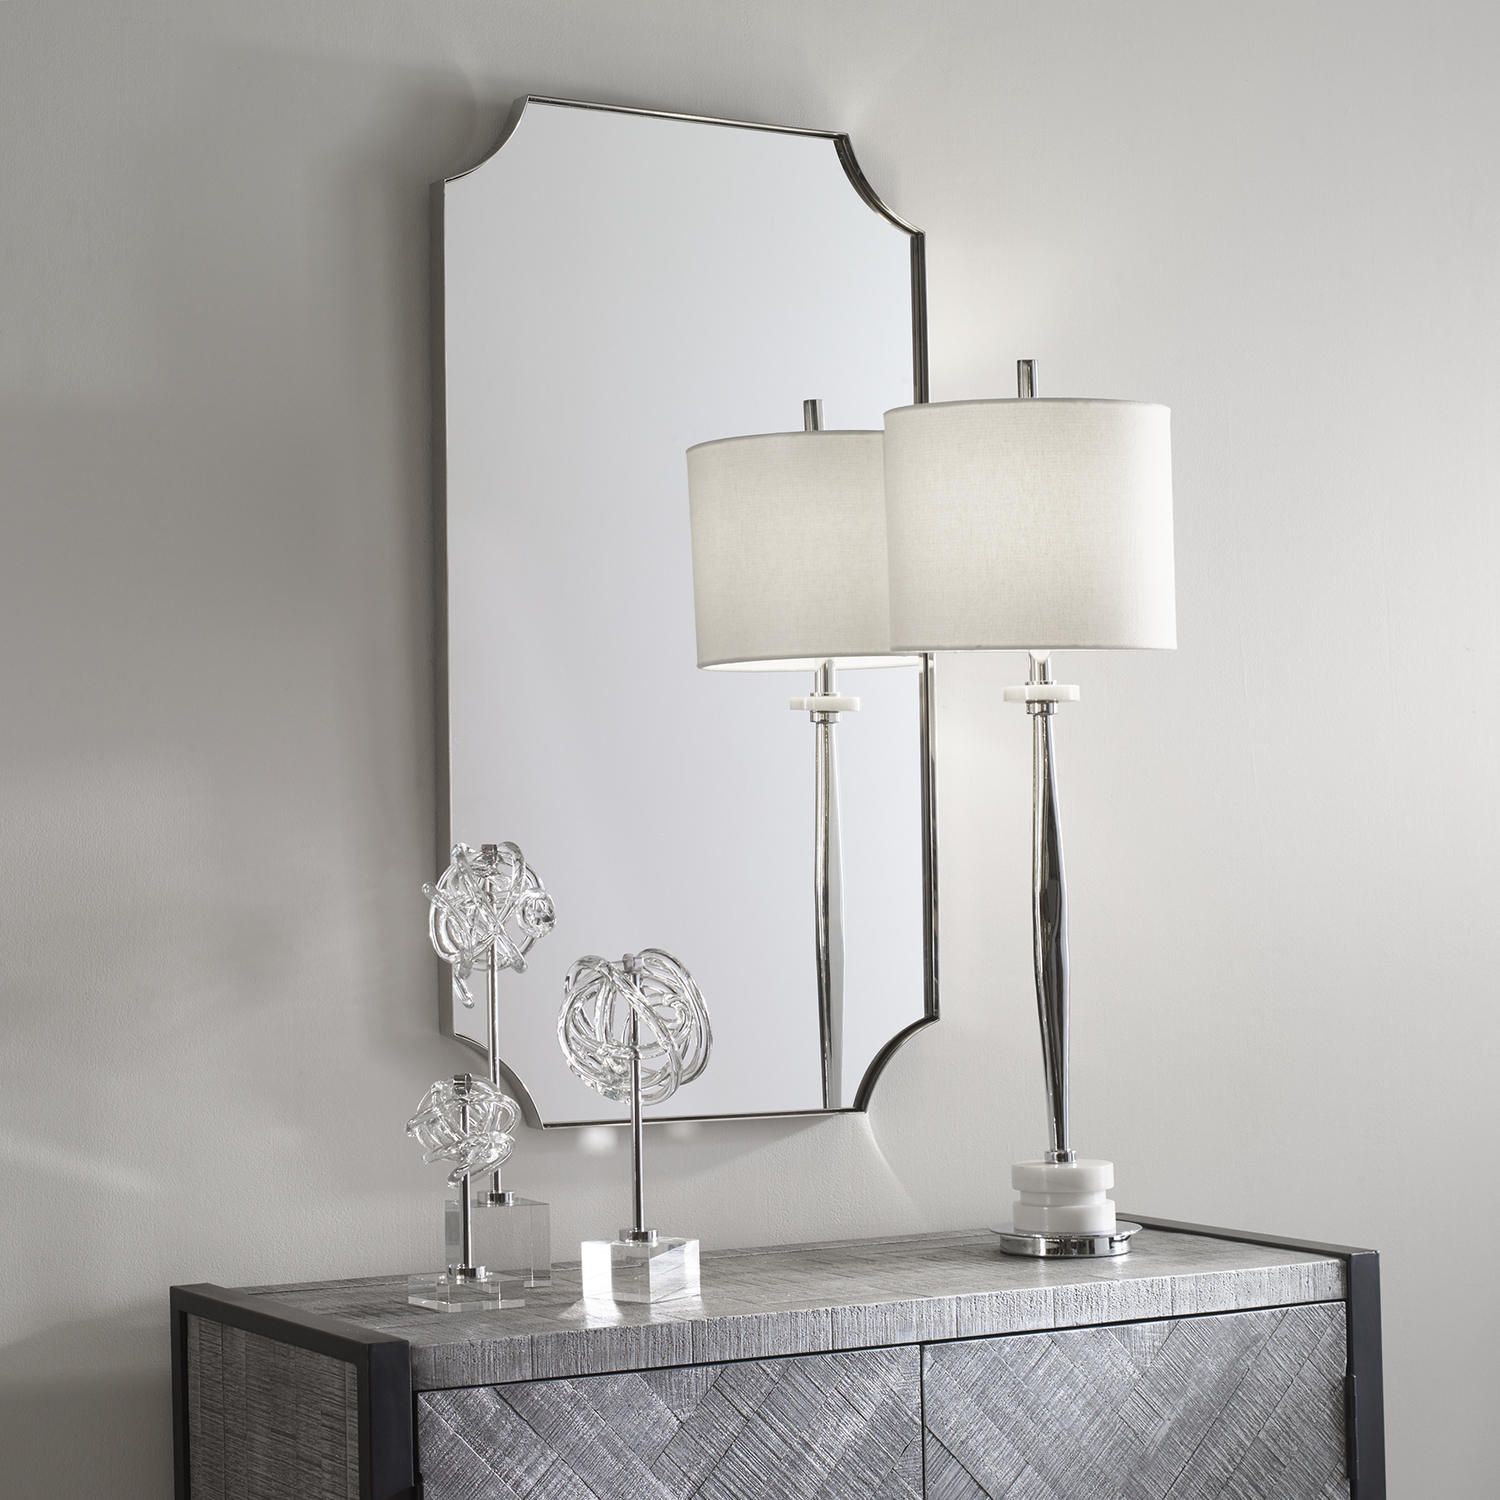 cheap long standing mirror Uttermost Nickel Scalloped Corner Mirror A Stylish Take On Updated Traditional Style, This Mirror Features A Stainless Steel Frame Finished In A Polished Nickel With Scalloped Corner Detailing. May Be Hung Horizontal Or Vertical.